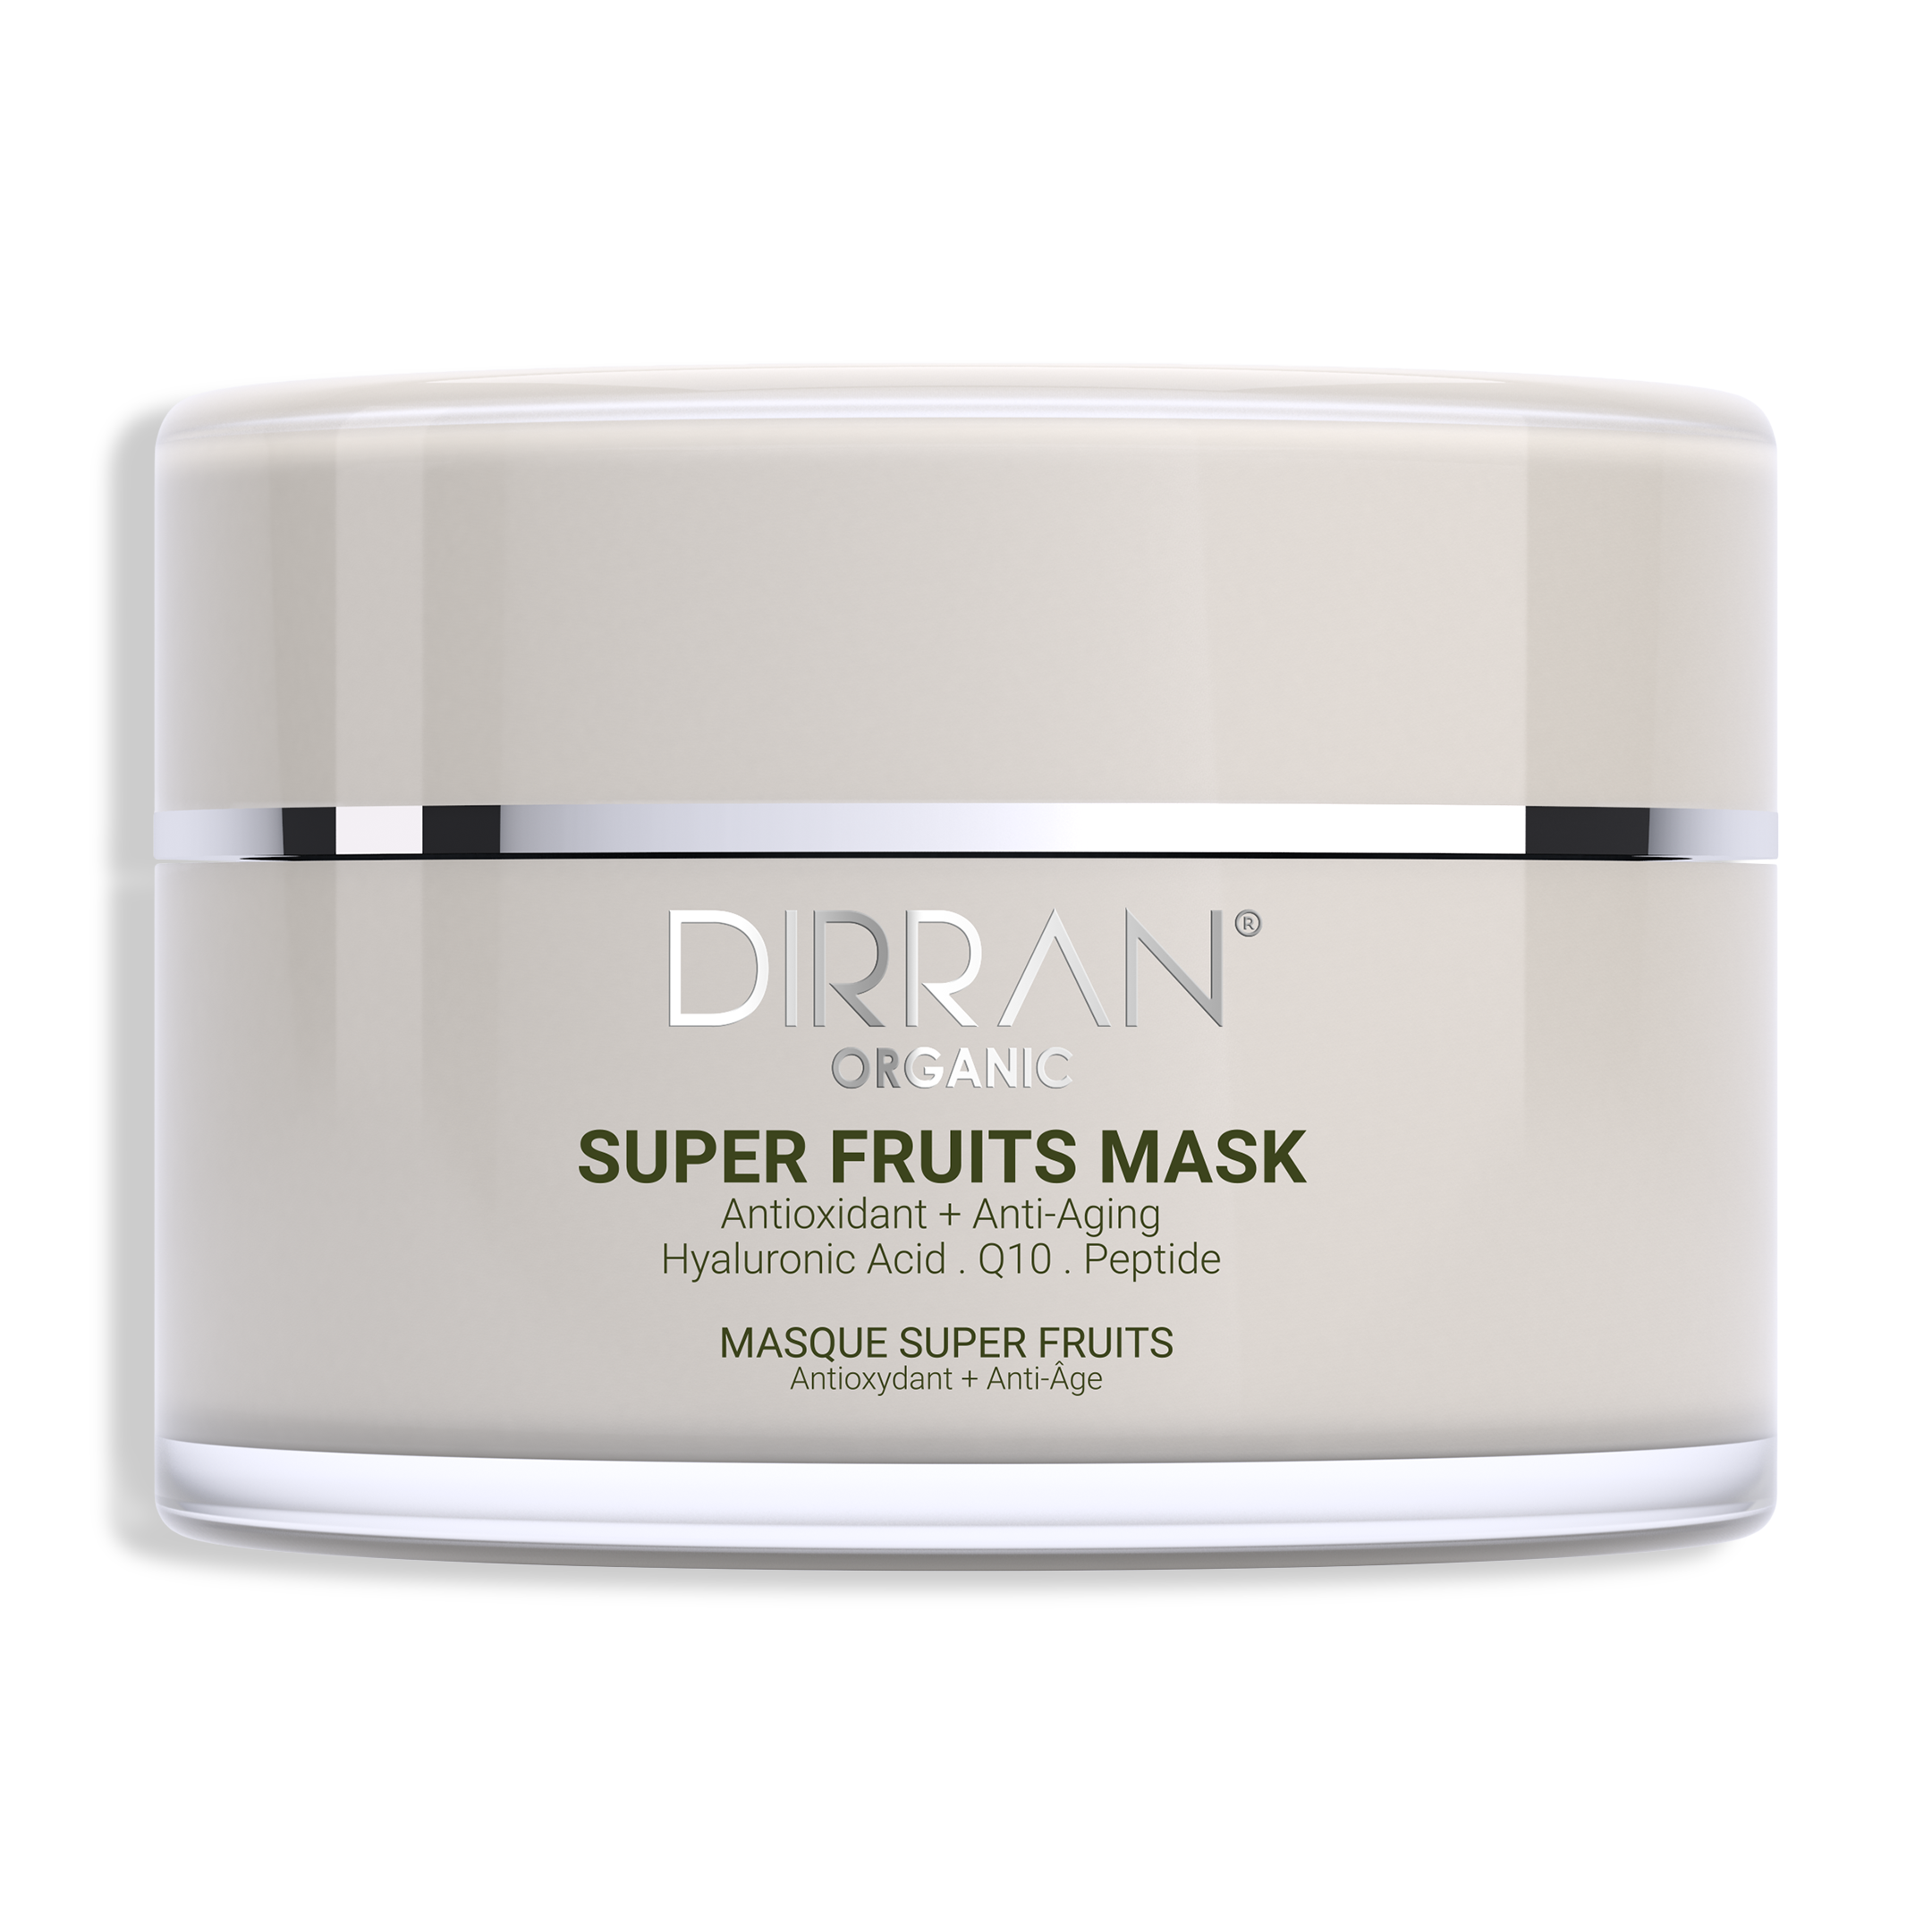 SUPER FRUITS MASK Antioxidant and Anti-Aging